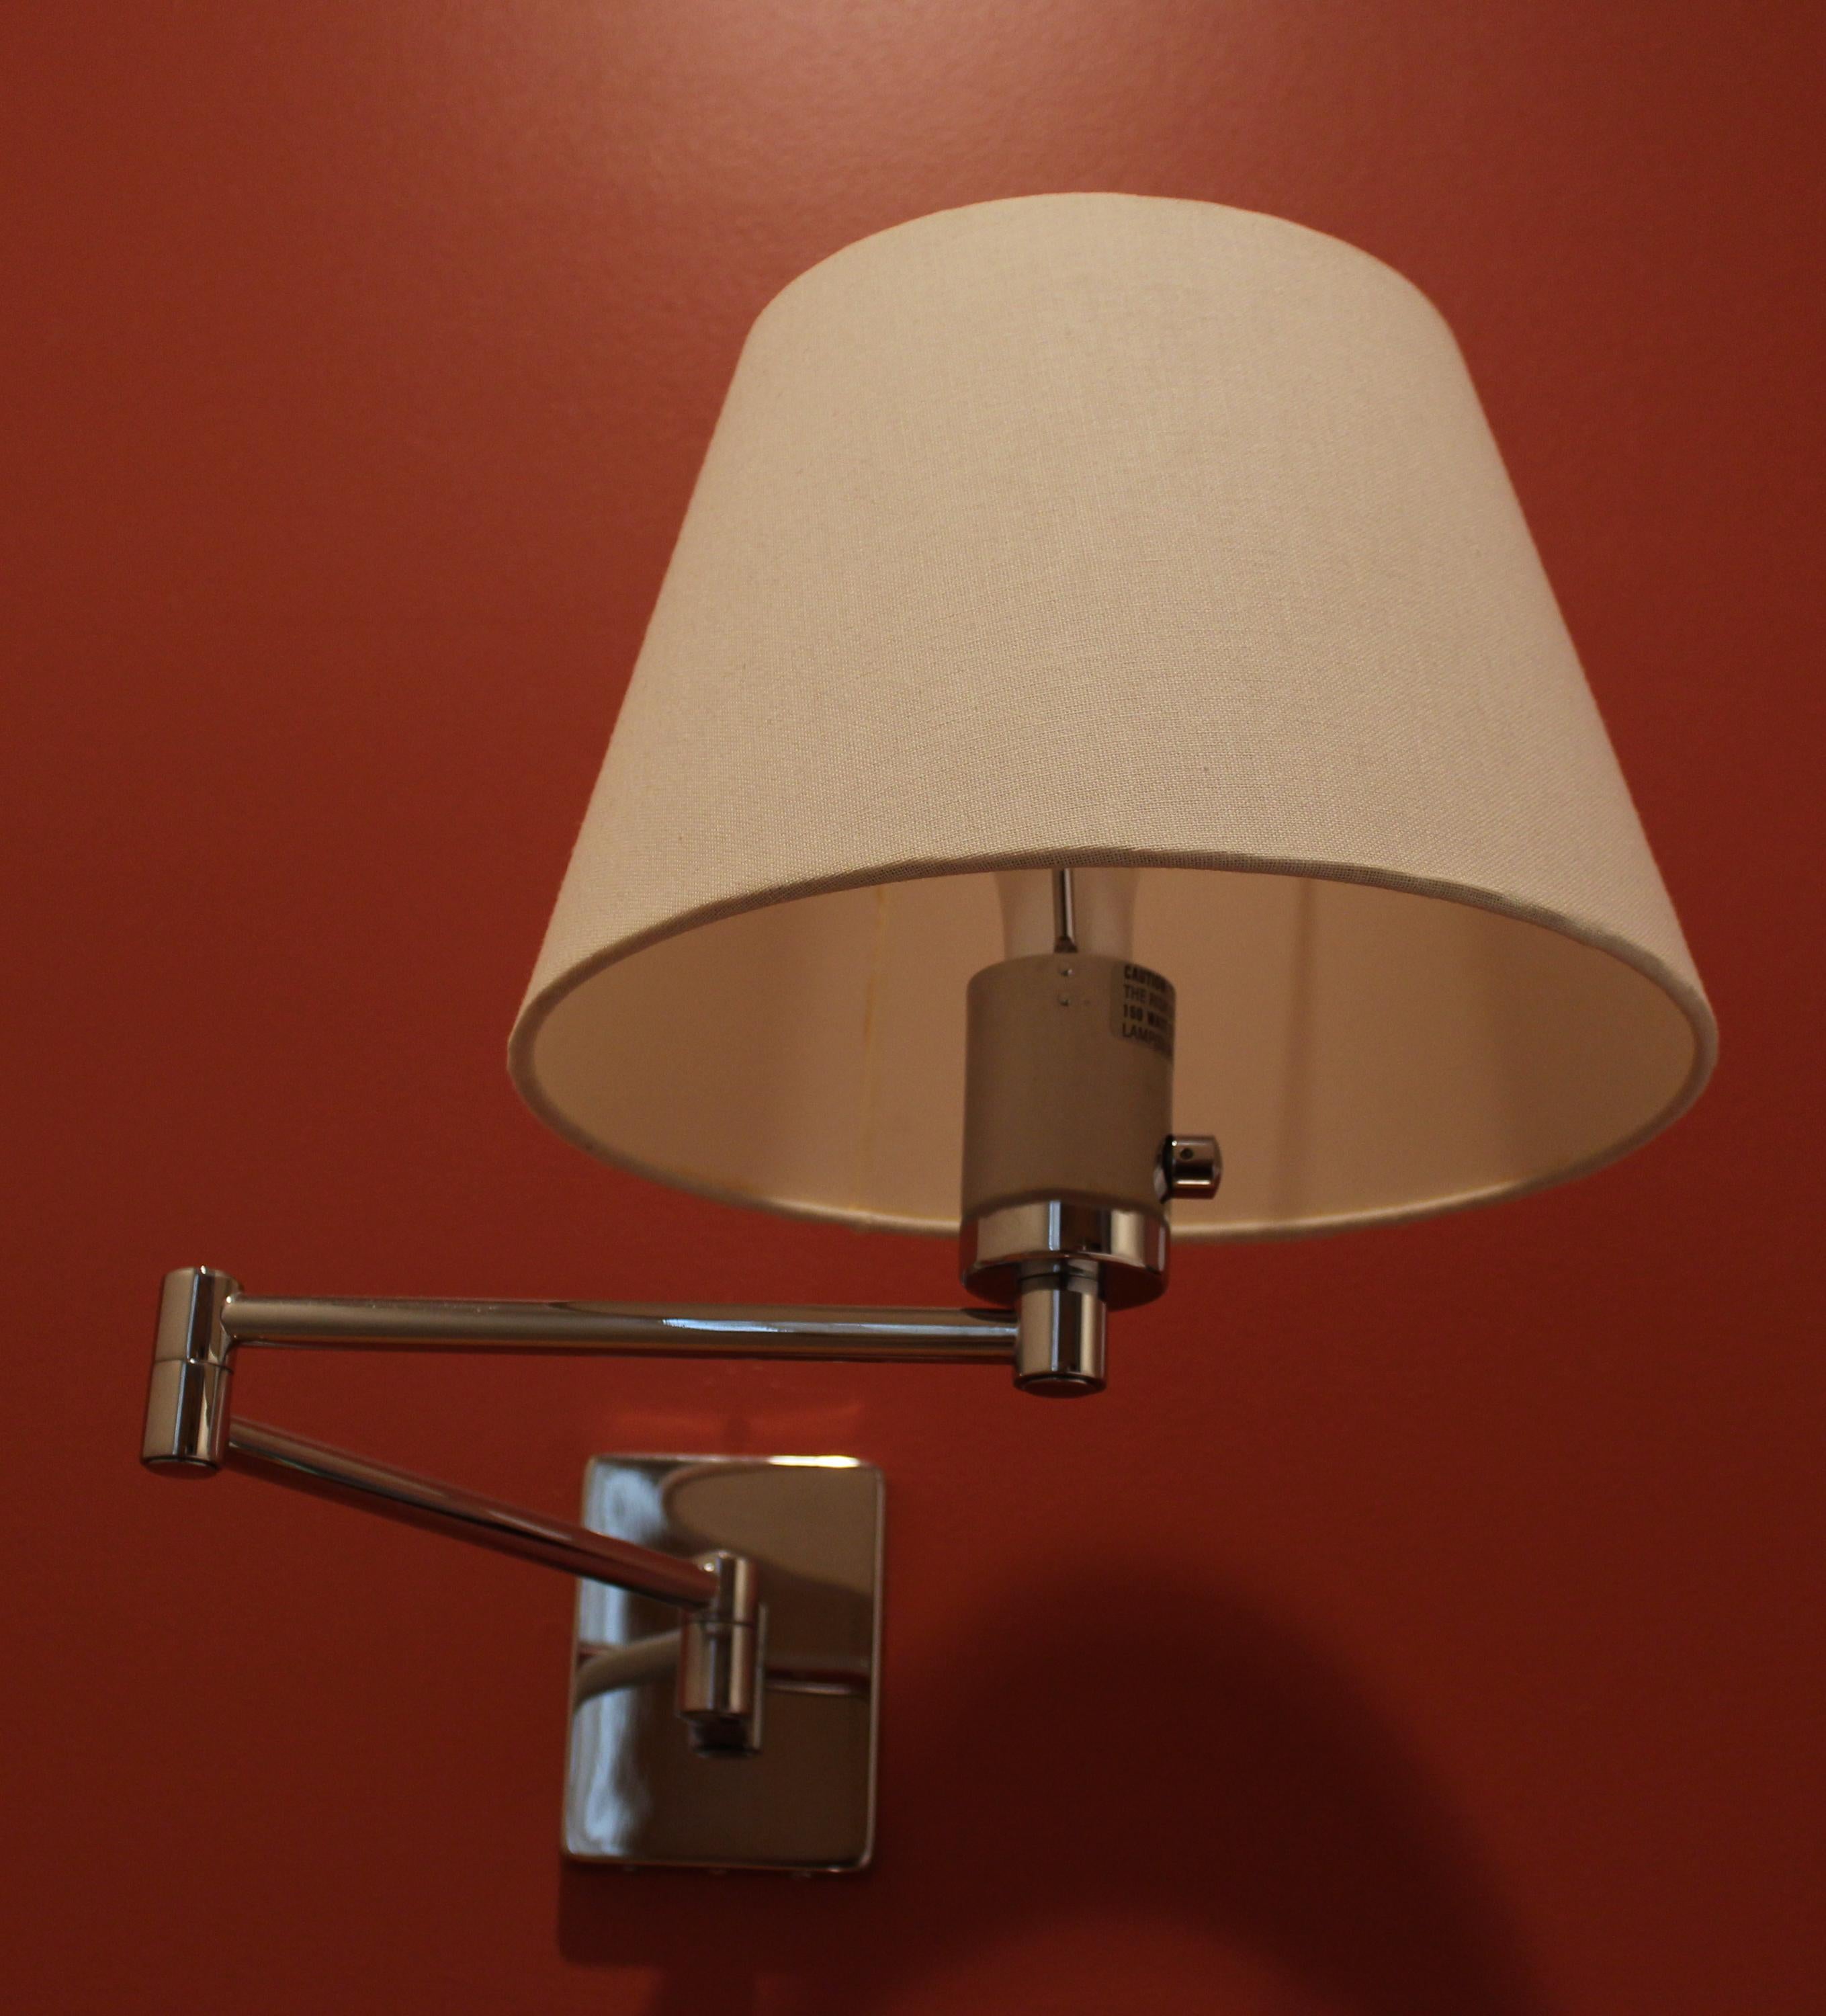 Mid-Century Modern Pair of George Hansen Swing Arm Wall Lights in Polished Nickel Plate for Hinson